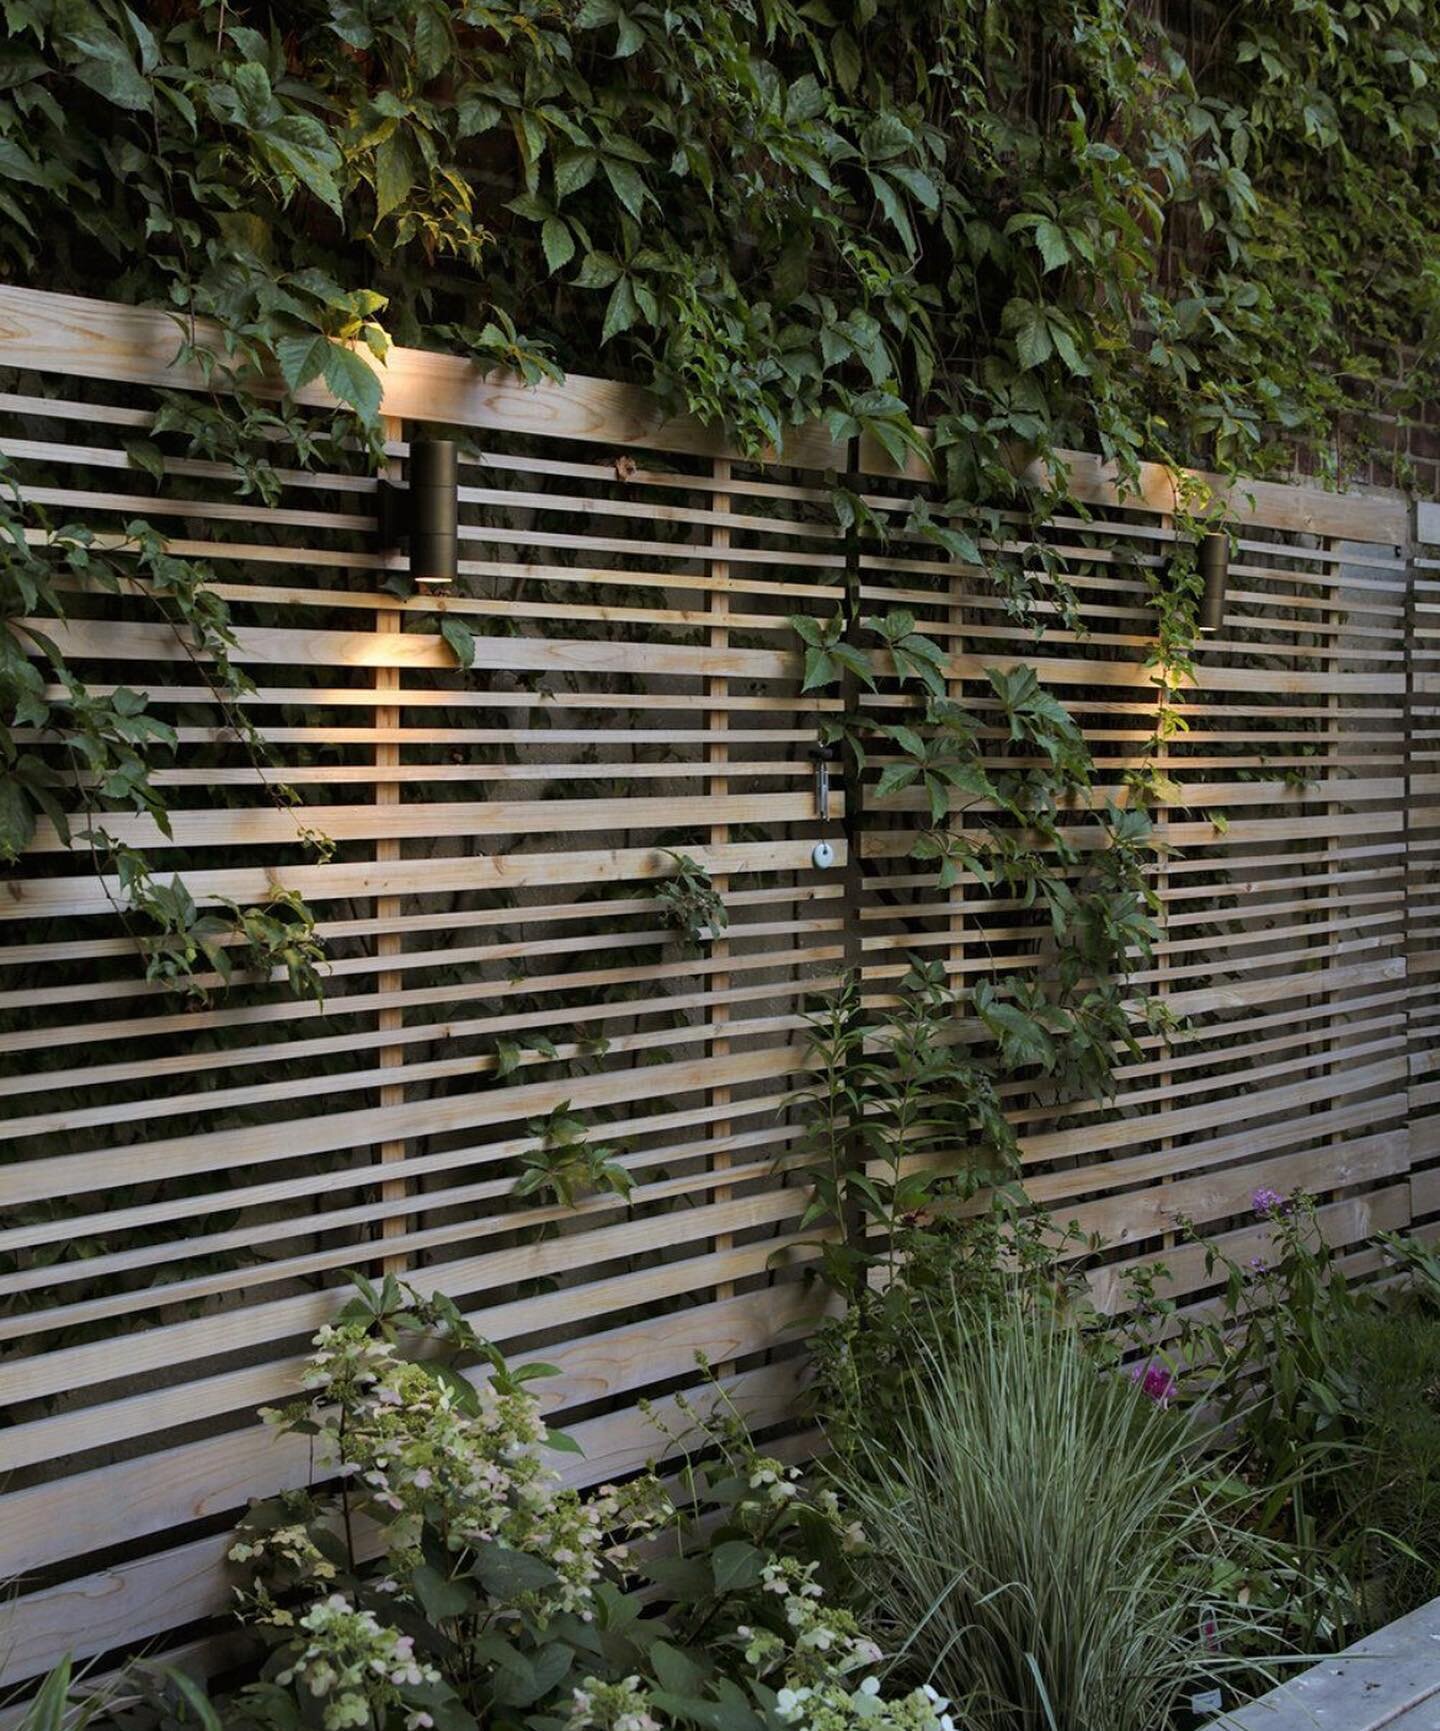 Moody summer nights on our mind. Hanging out in our Gowanus garden at dusk under the vine clad walls is magic. We designed this cedar wall cladding to support and celebrate the vines and added wall scones to illuminate them! @voltlighting 
.
.
.
.
#u